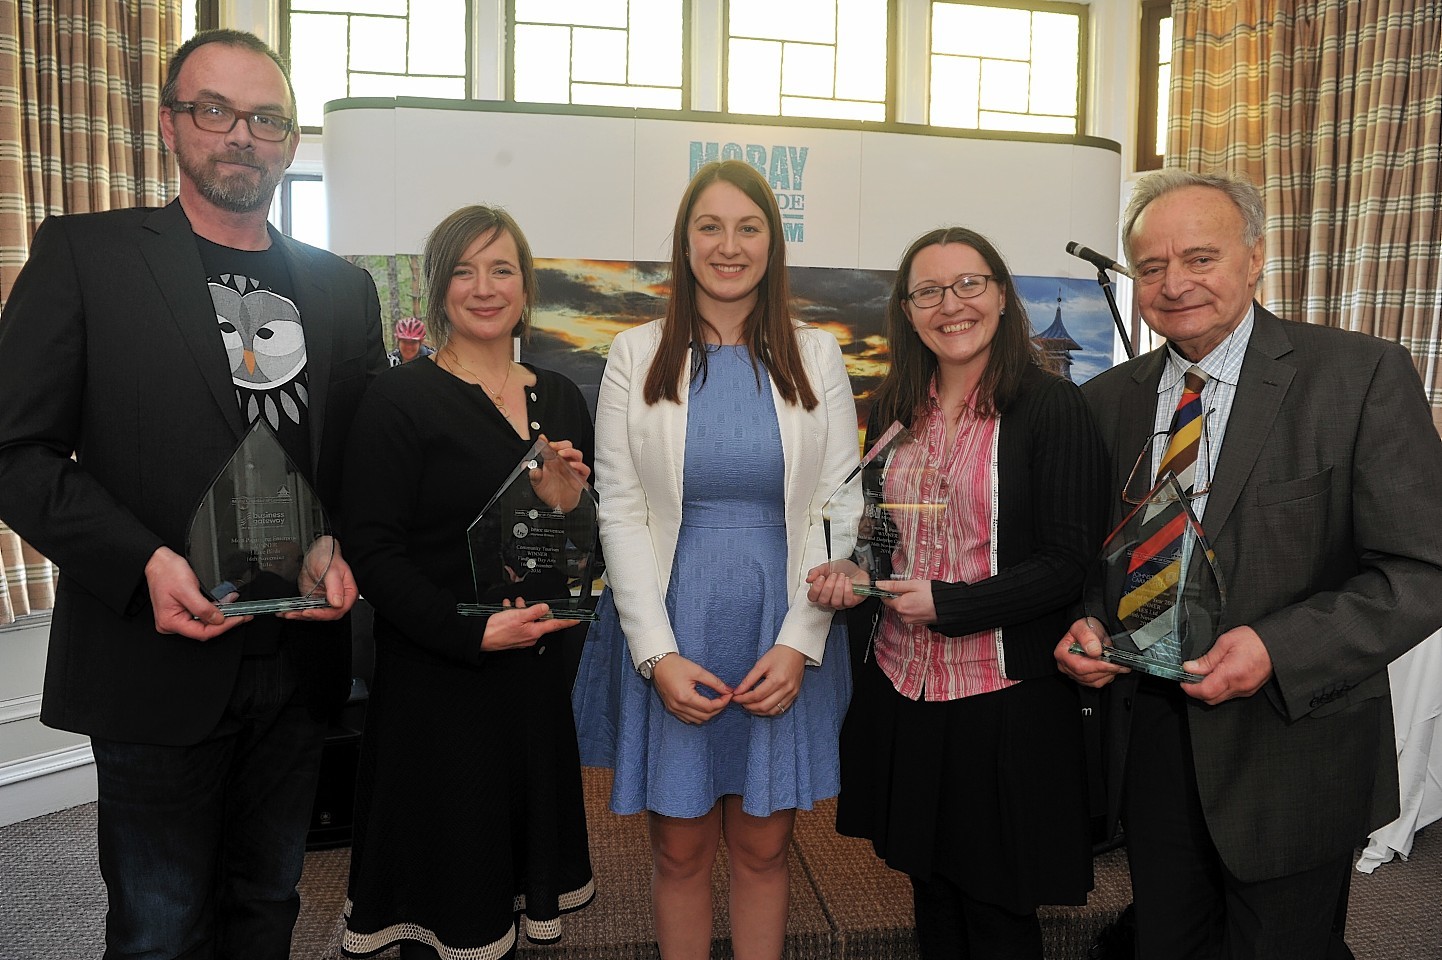 Chamber chief executive Sarah Medcraf, centre, with the award winners, L-R: Stuart Cox, I Like Birds, Kresanna Aigner, Findhorn Bay Arts, Alison Rose, Spey Bay Whale and Dolphin Centre, and George Goudsmit, AES Solar.